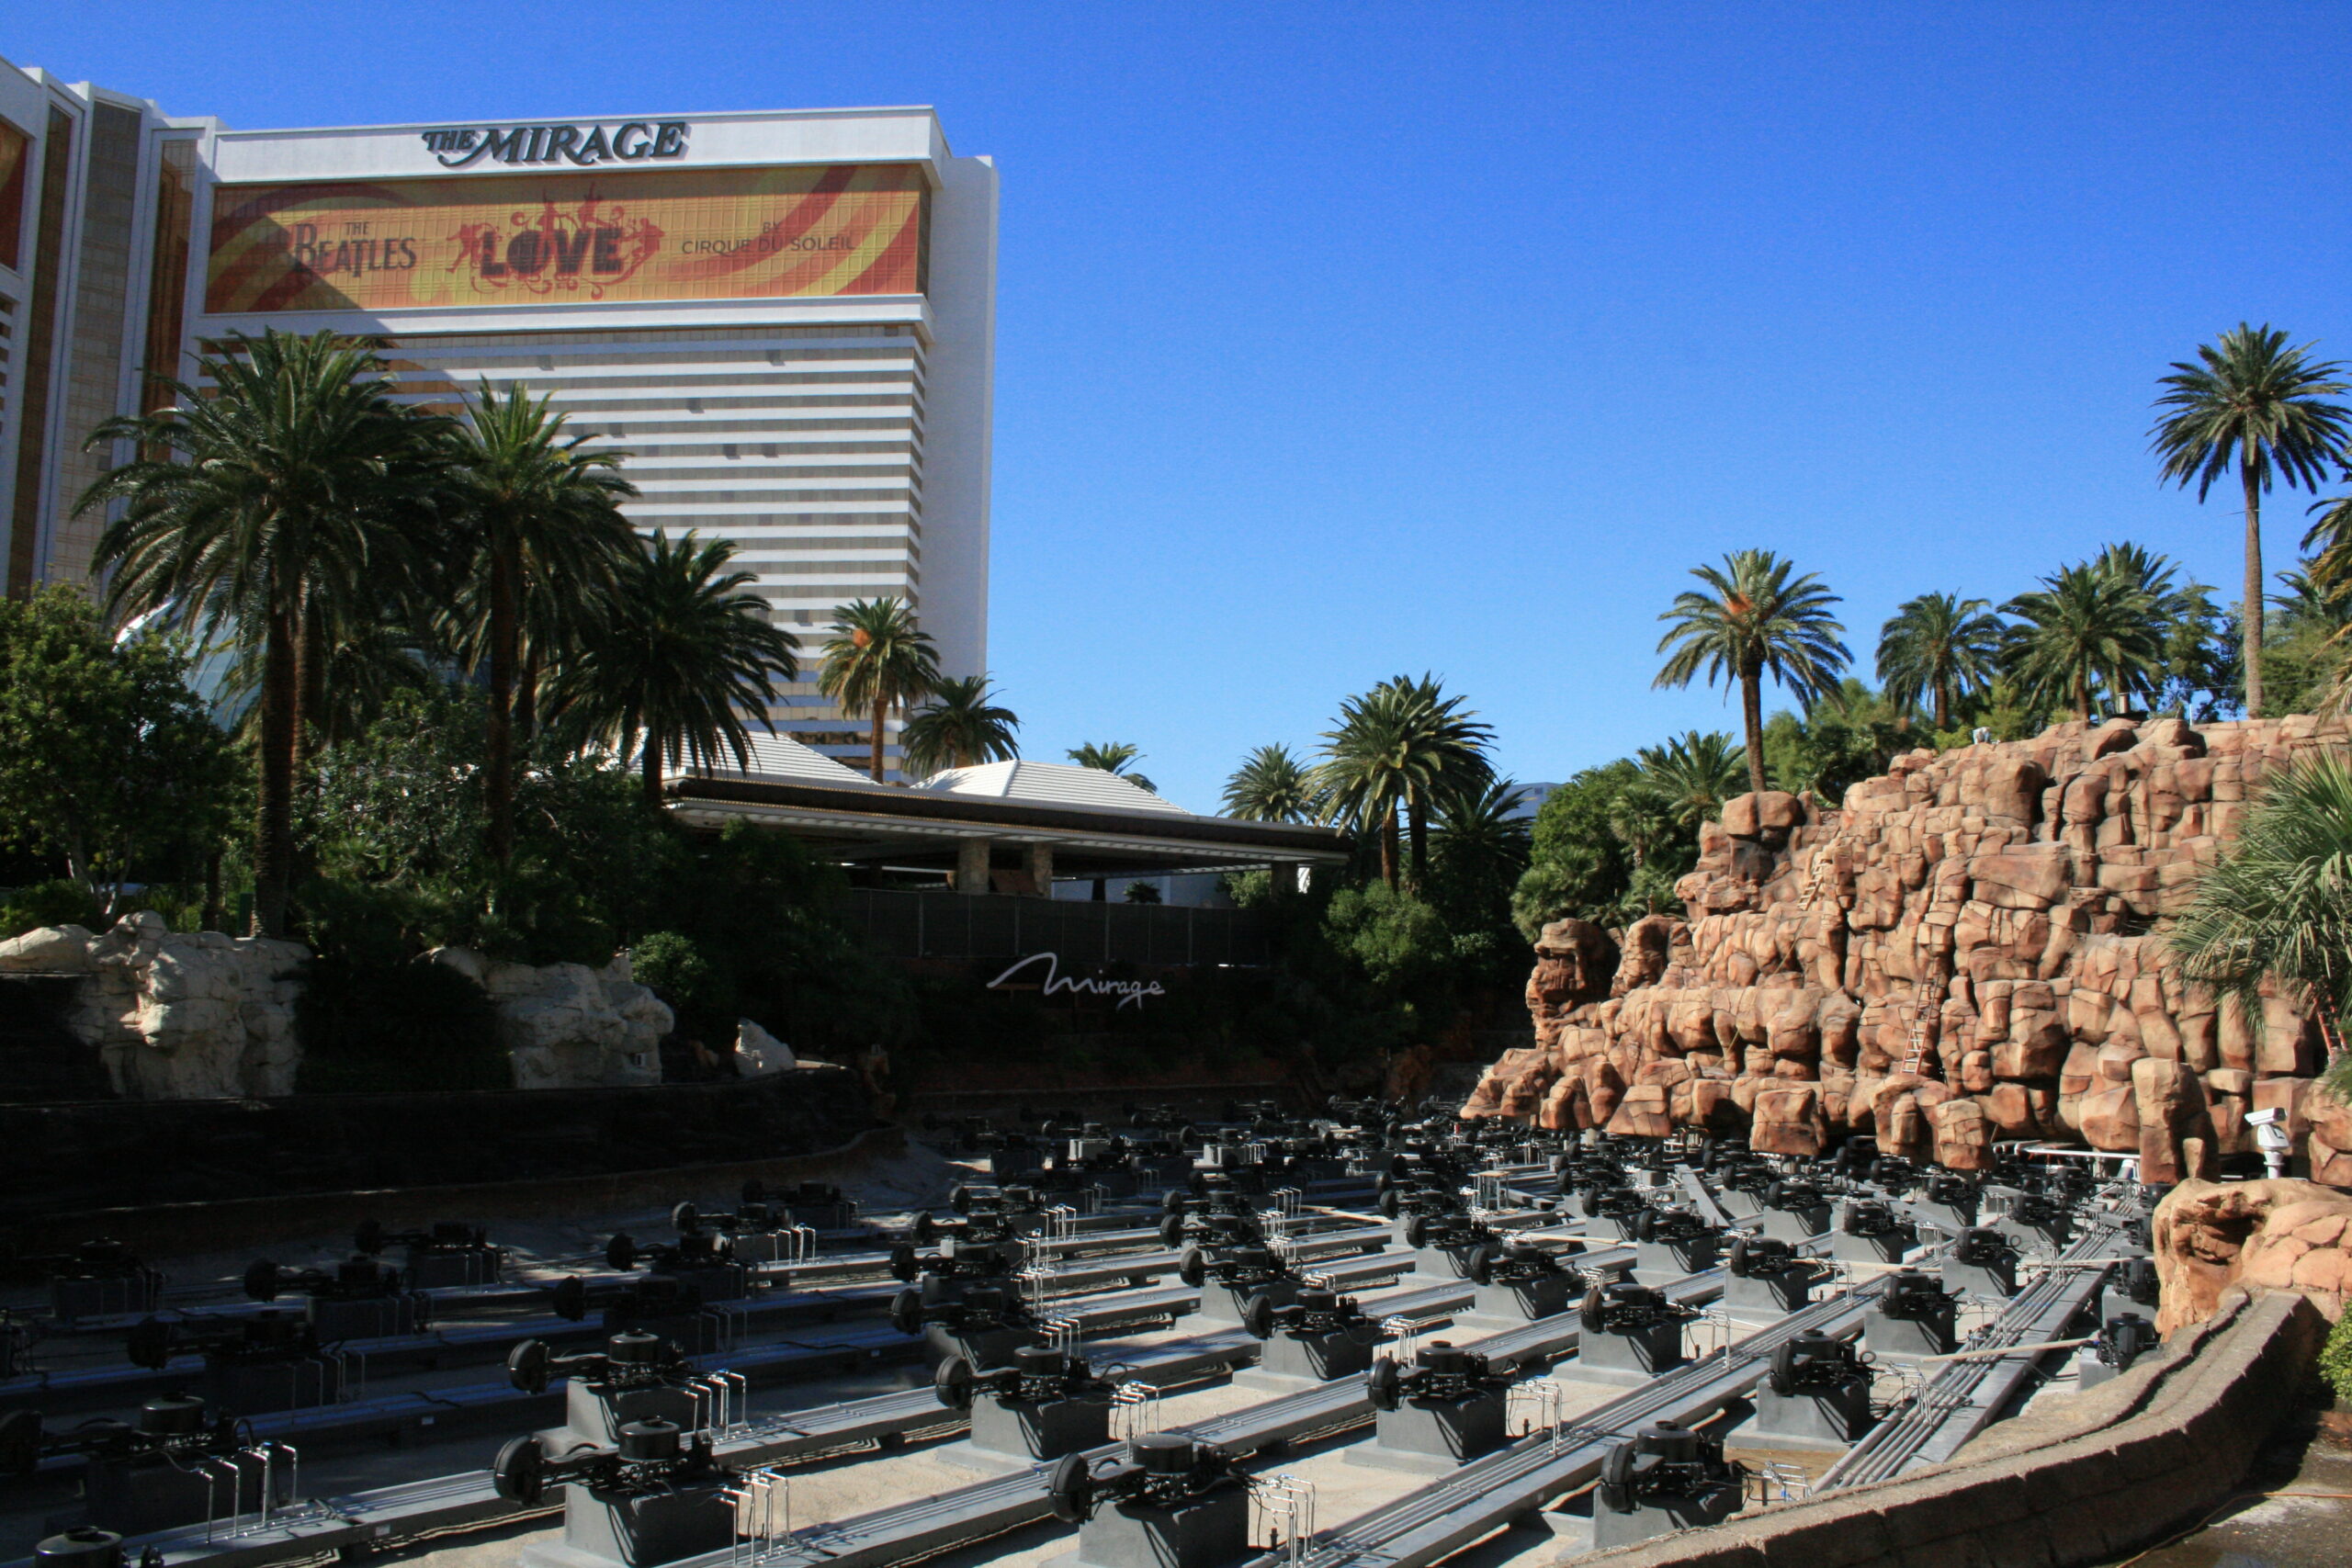 Construction exposes the underbelly of the Las Vegas facade and inhuman lava machines at The Mirage.